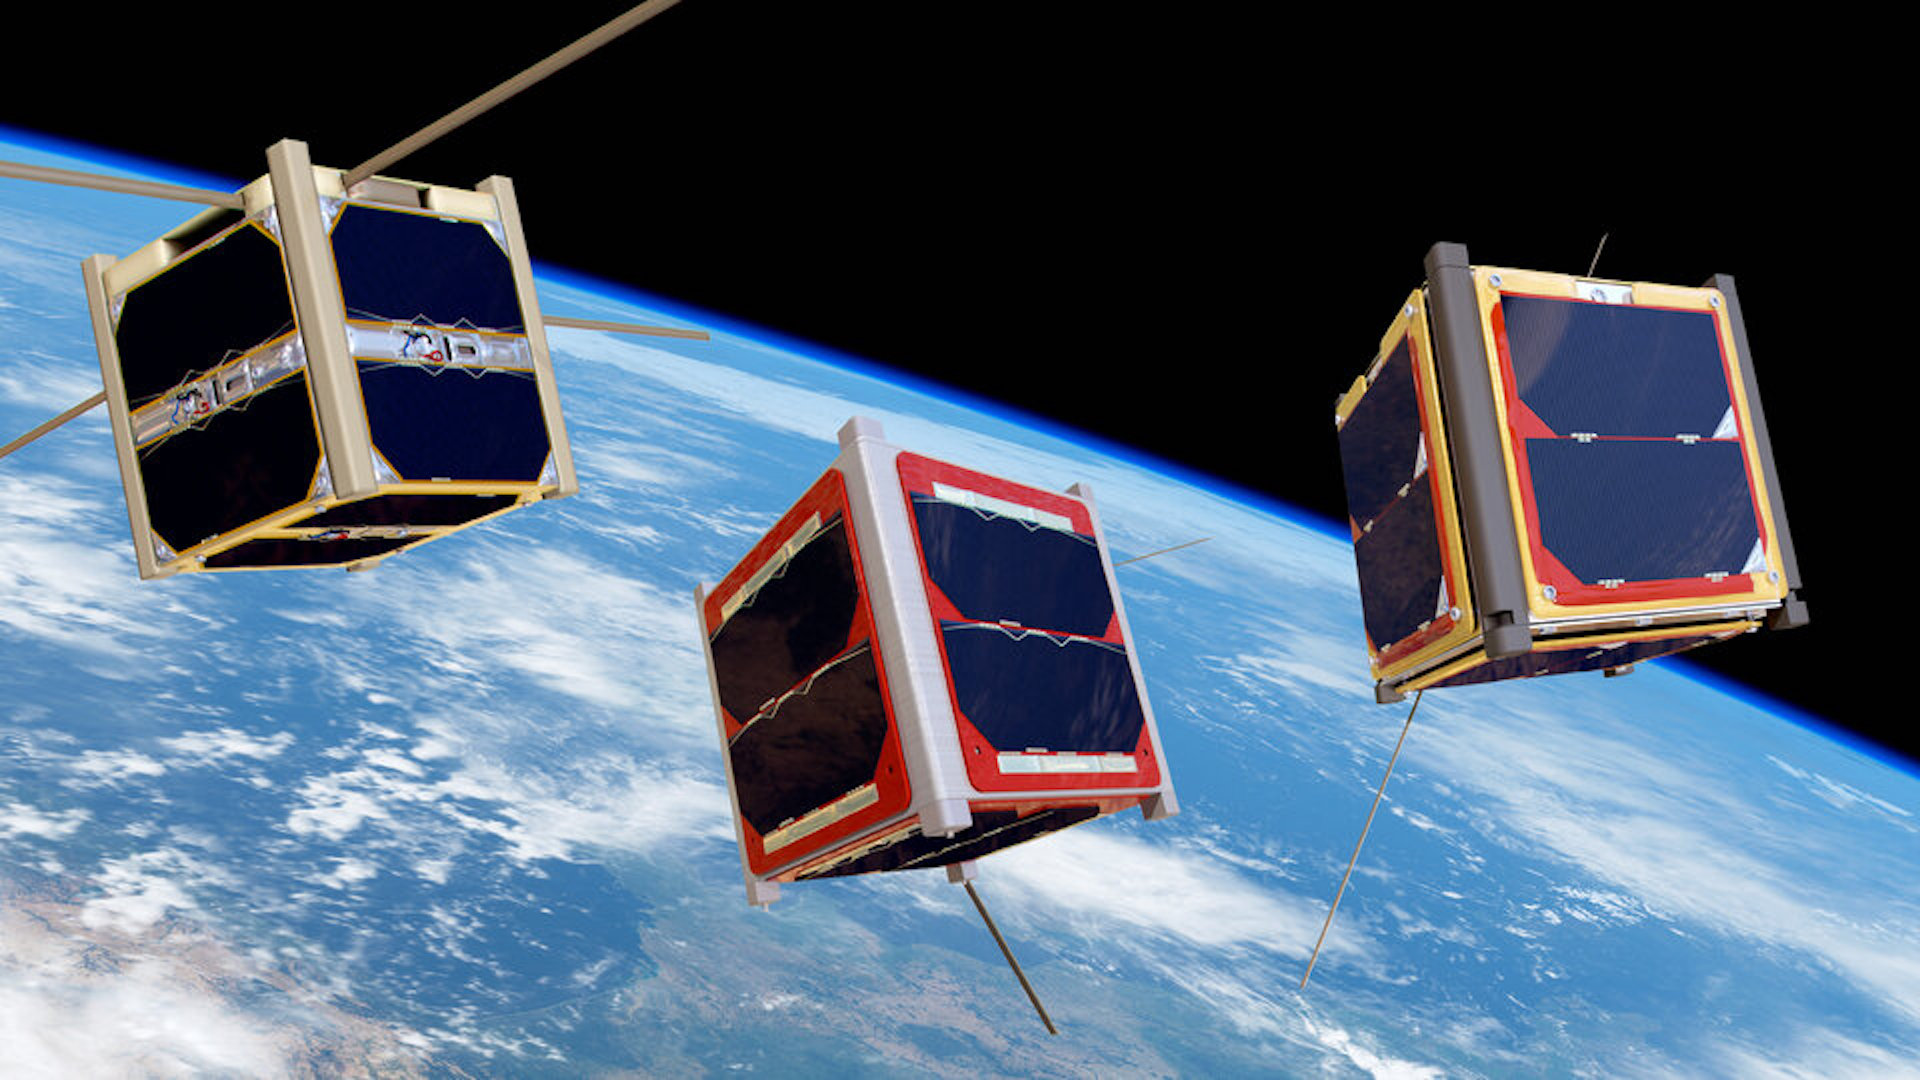 ASI - Call for Papers “CubeSats Applications for Earth and Prospectives for Planetary Remote Sensing”